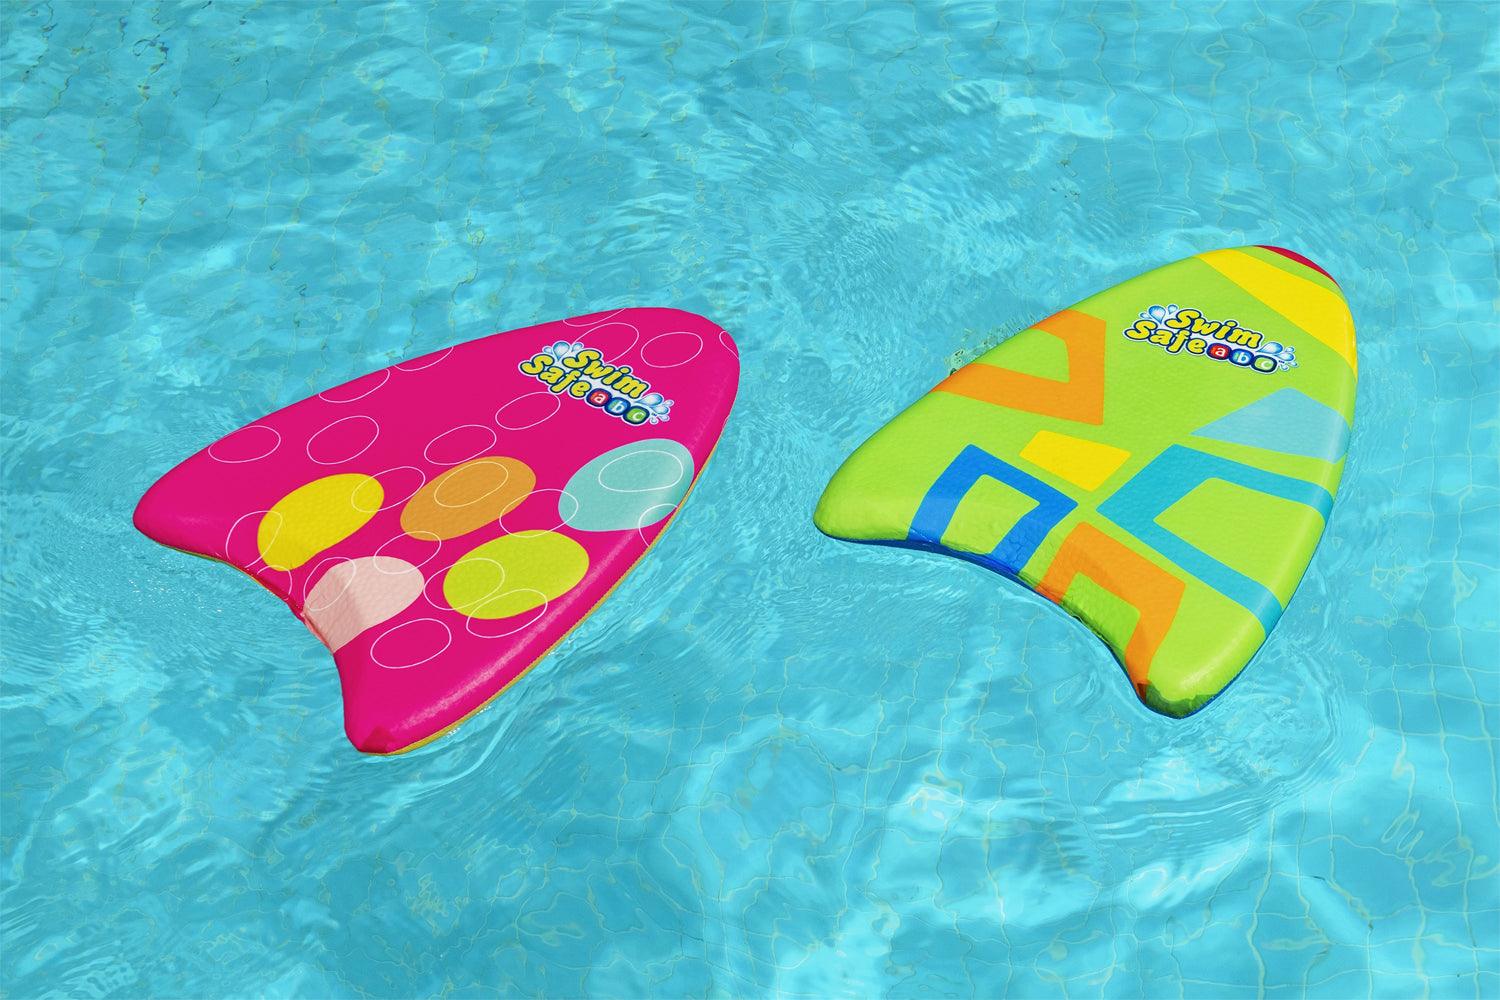 Swim Safe ABC™ Kickboard with Textile Cover Level C AquaStar™ 3-6 Years - Ourkids - Bestway